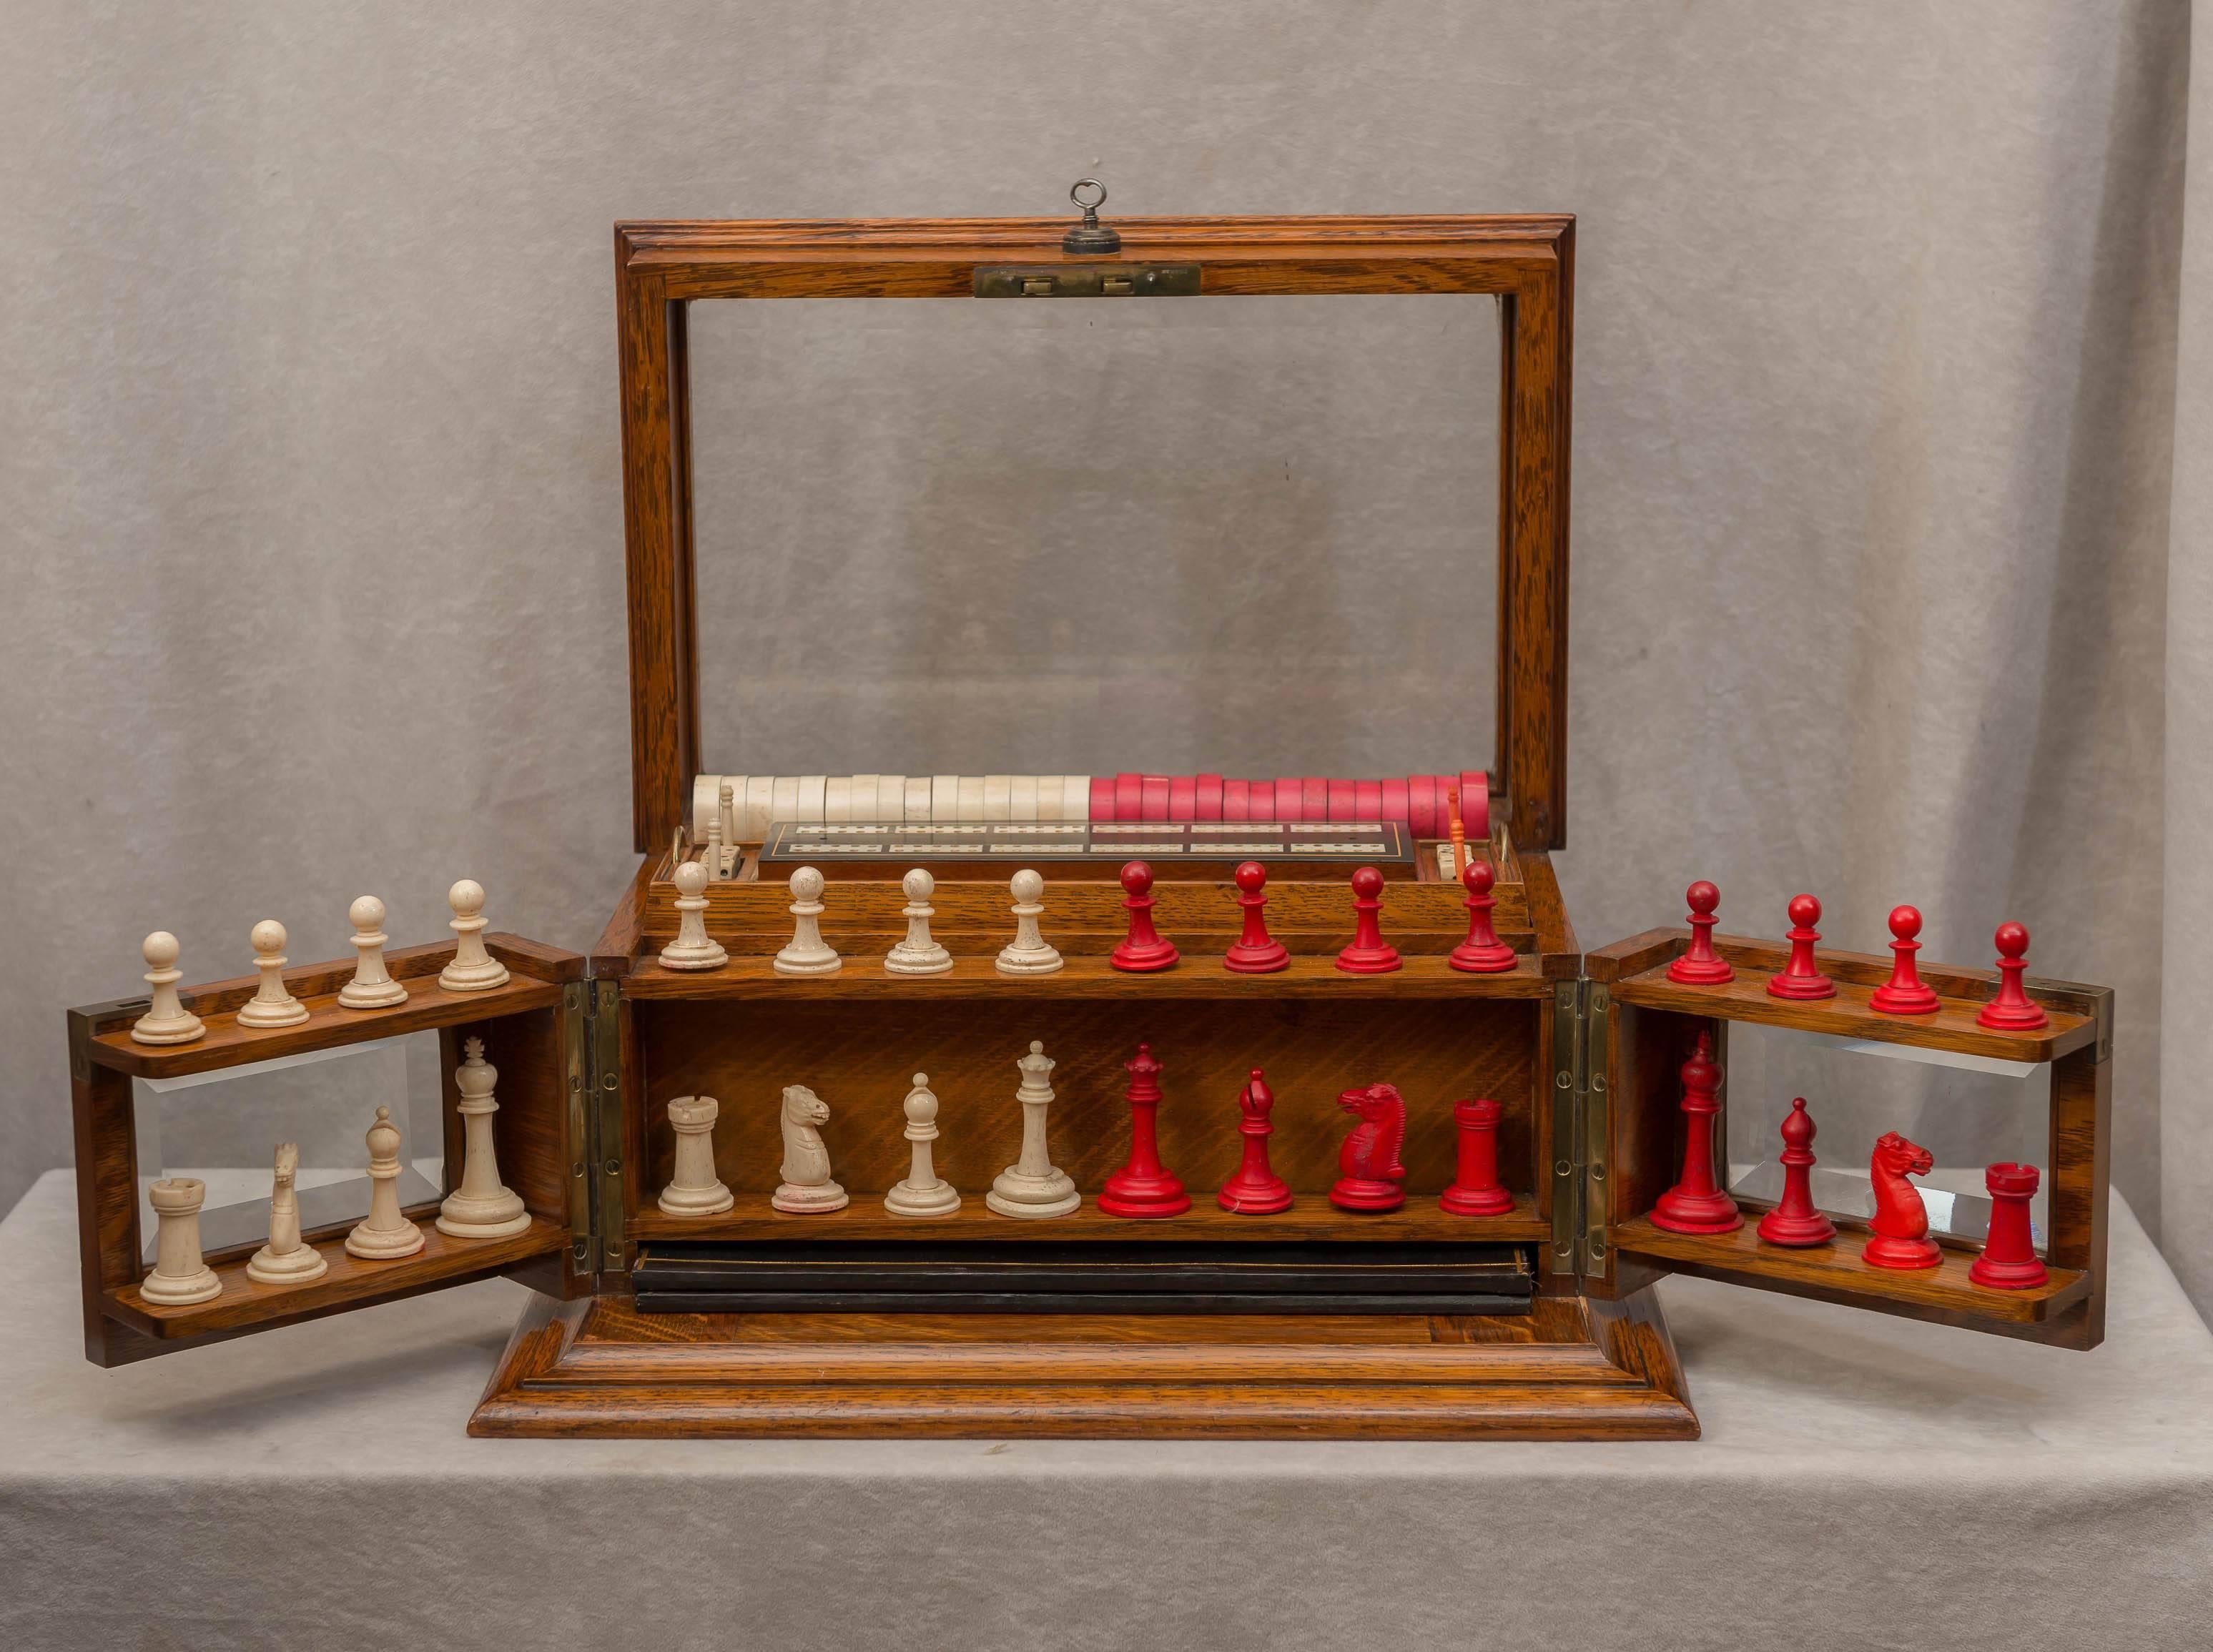 This is easily one of the most wonderful antique items I have ever offered. Starting with a handsome Edwardian oak box with beveled glass, and each time you search through other games become exposed. As we say in our description, it has chess,